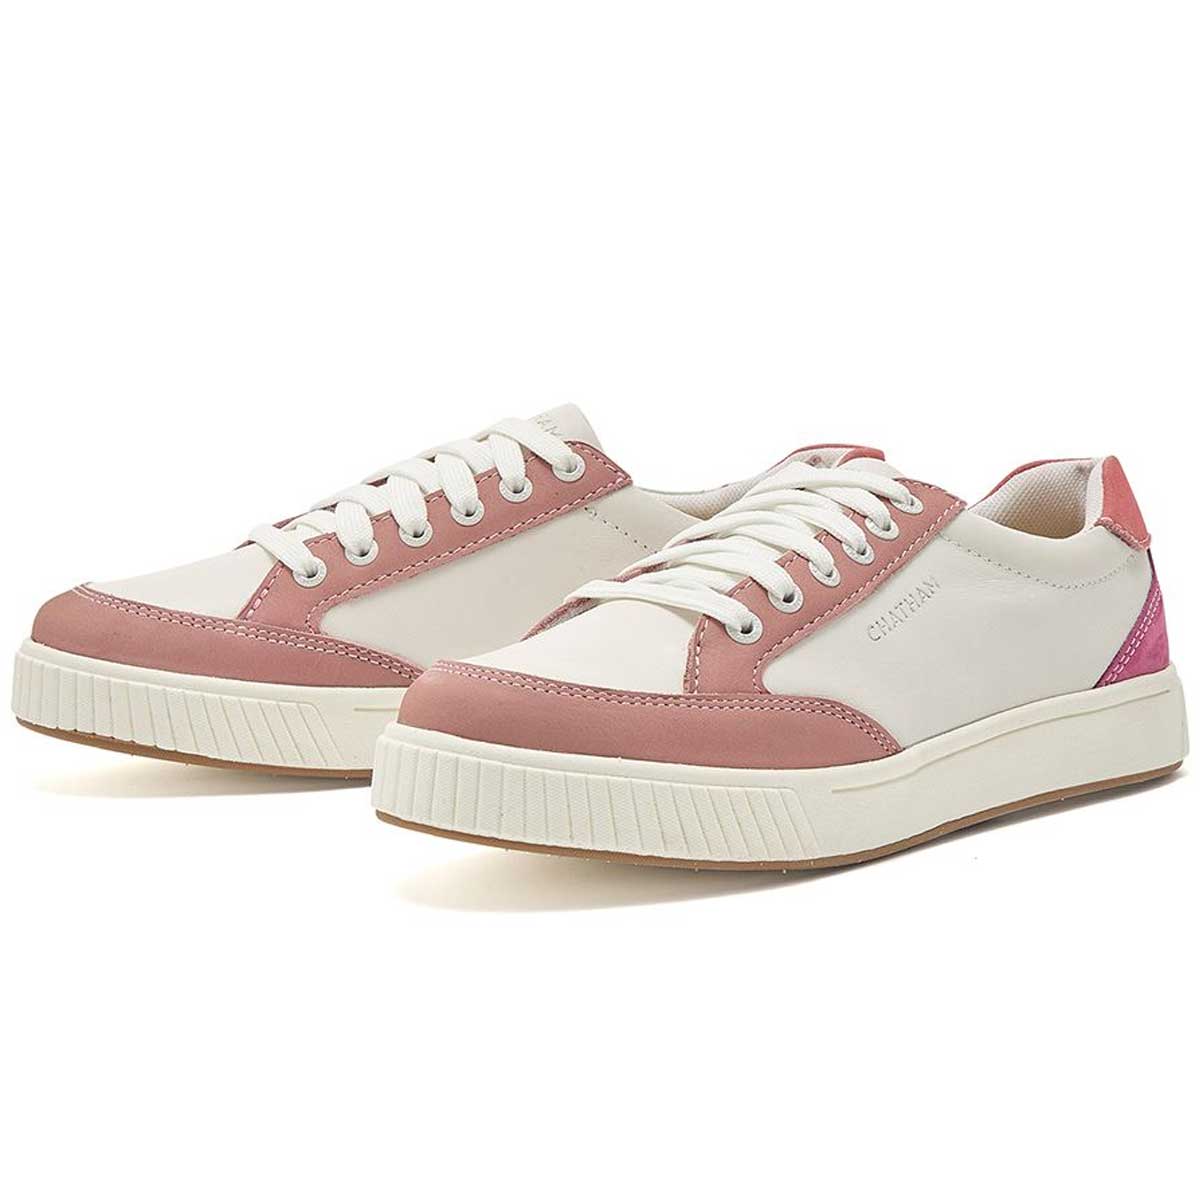 CHATHAM Fingle G2 Premium Leather Court-Style Trainers - Women's - White / Pink